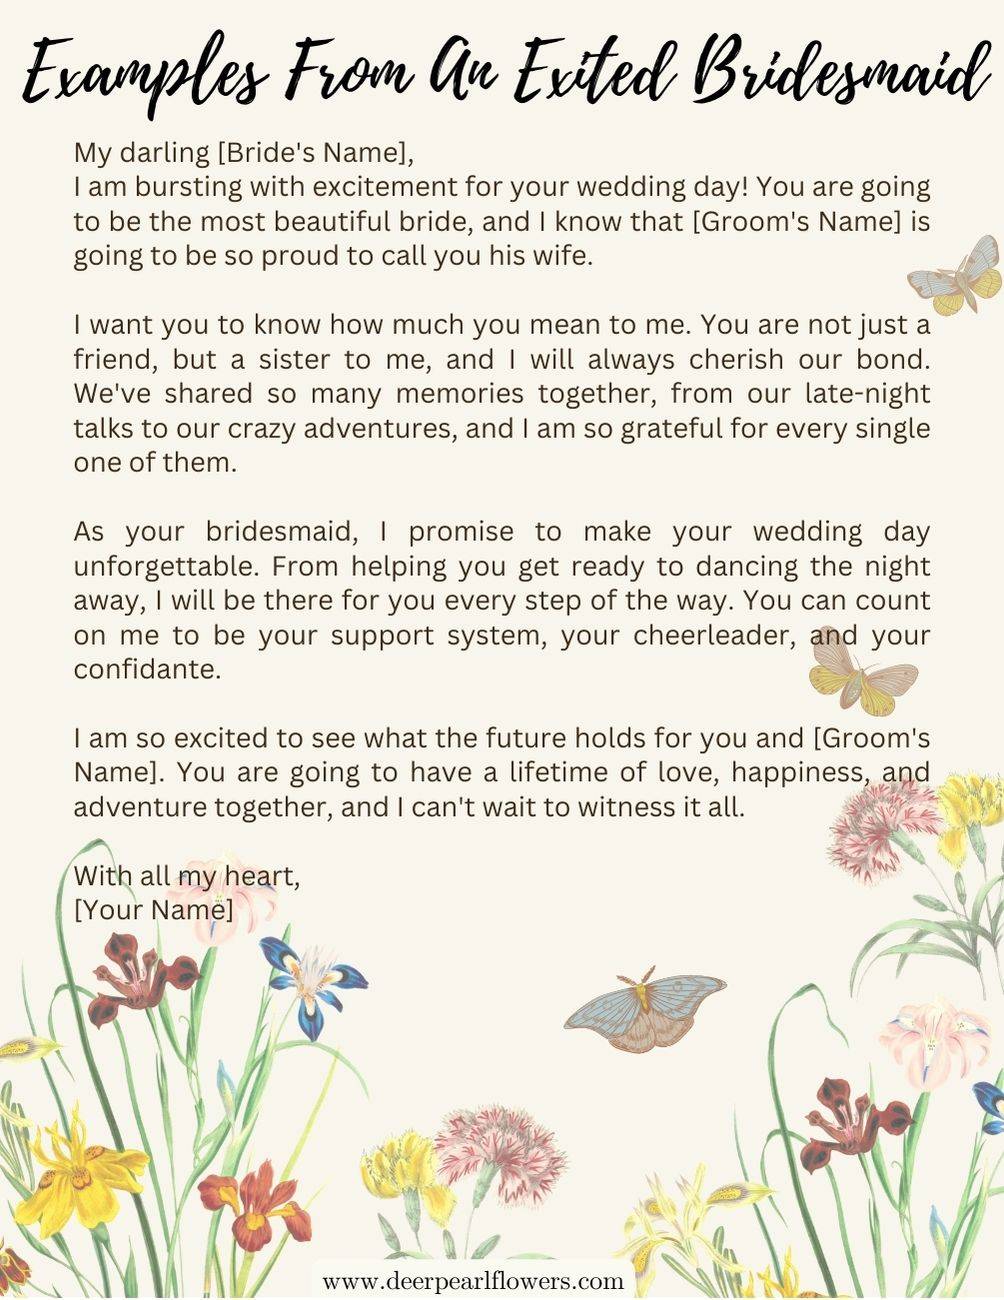 Best Letter To Bride From Bridesmaid Examples Tips